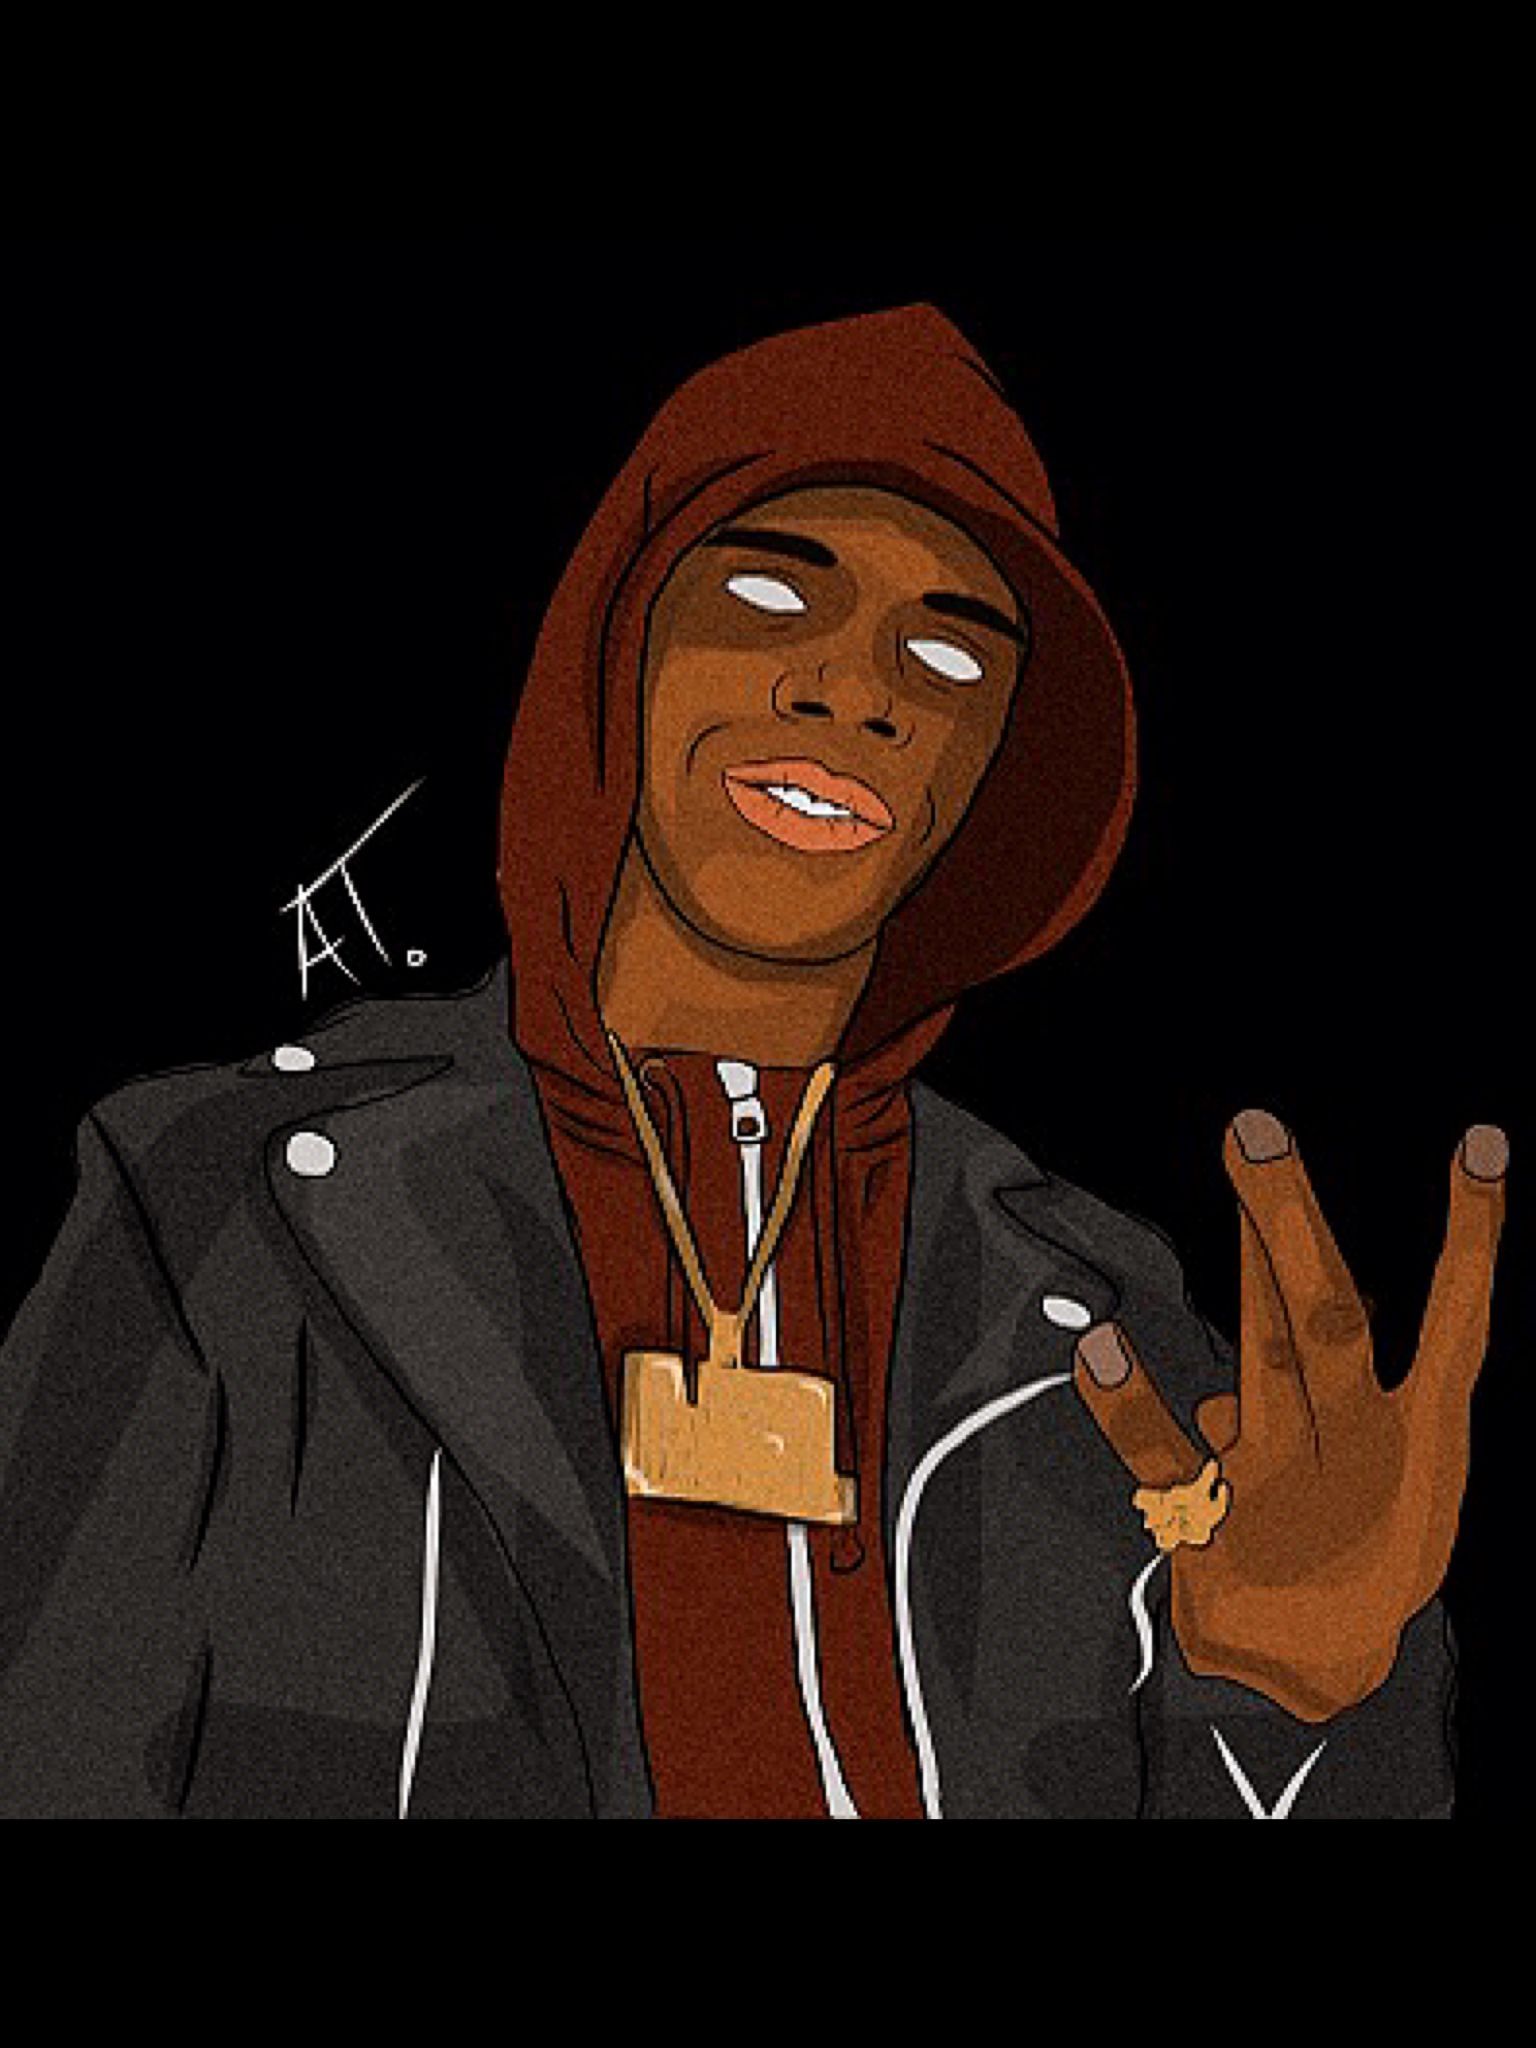 A Boogie wit da Hoodie Wallpaper HD for PC  How to Install on Windows PC  Mac